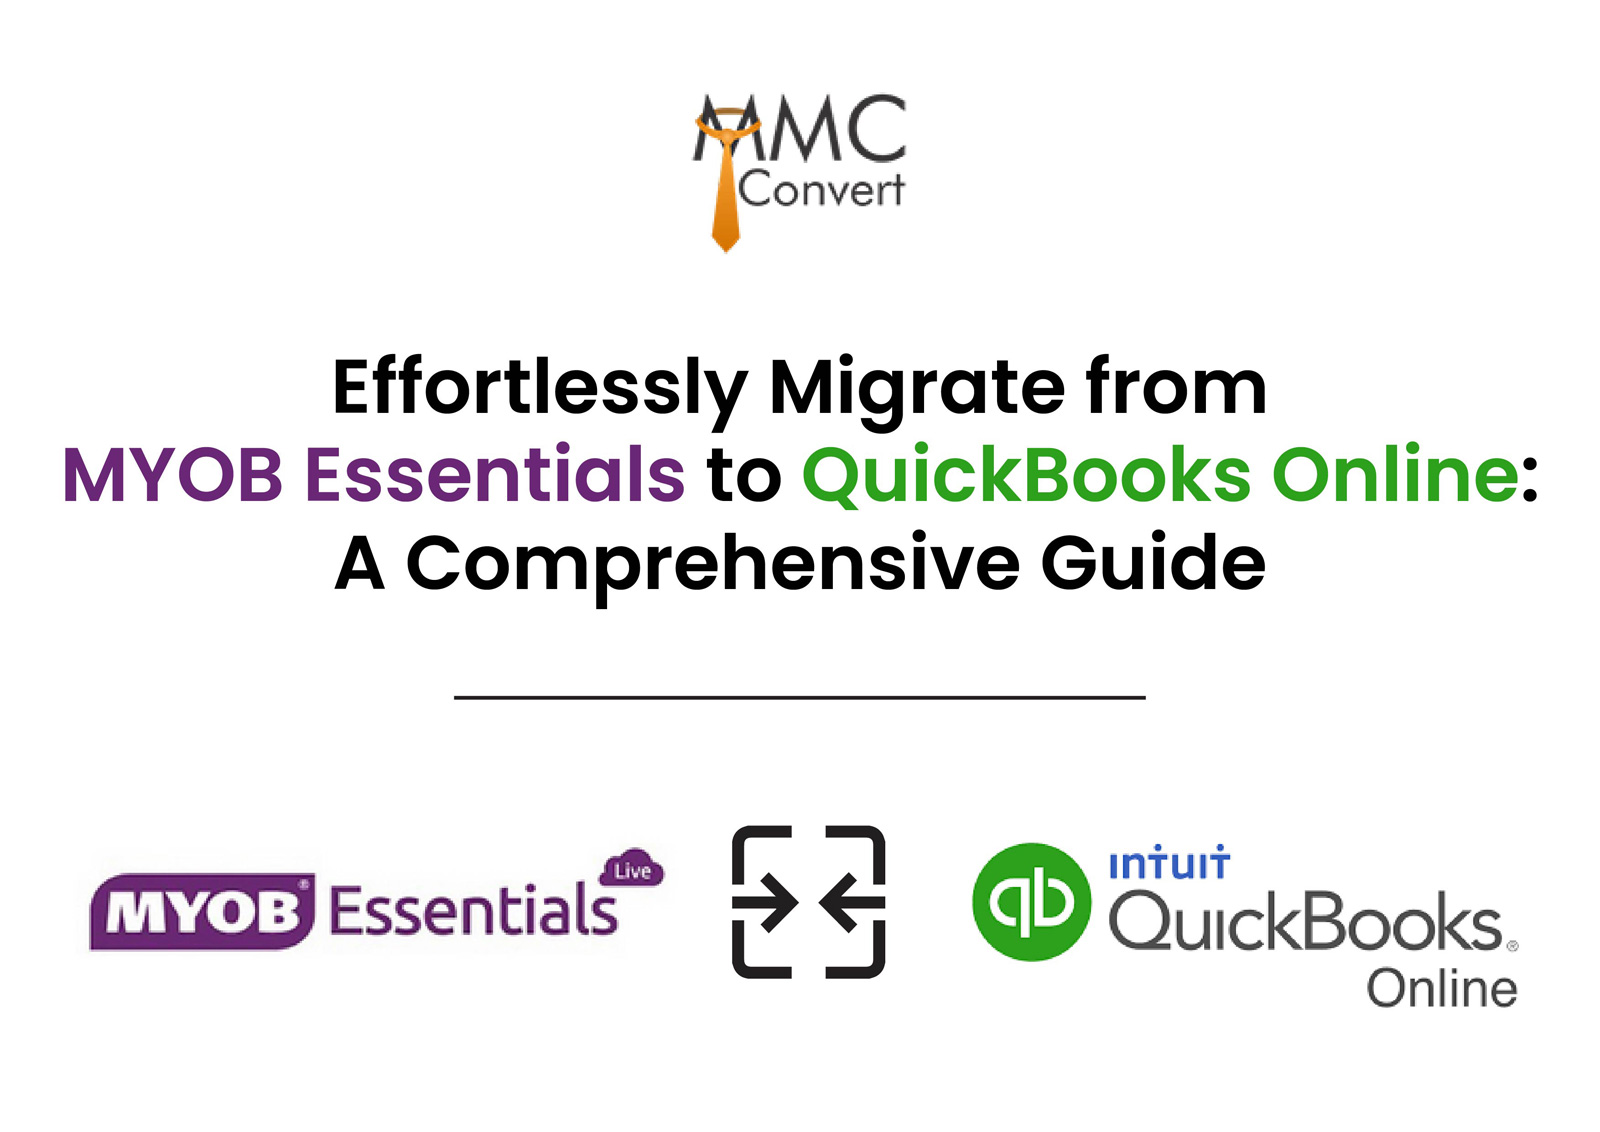 Effortlessly Migrate from MYOB Essentials to QuickBooks Online: A Comprehensive Guide